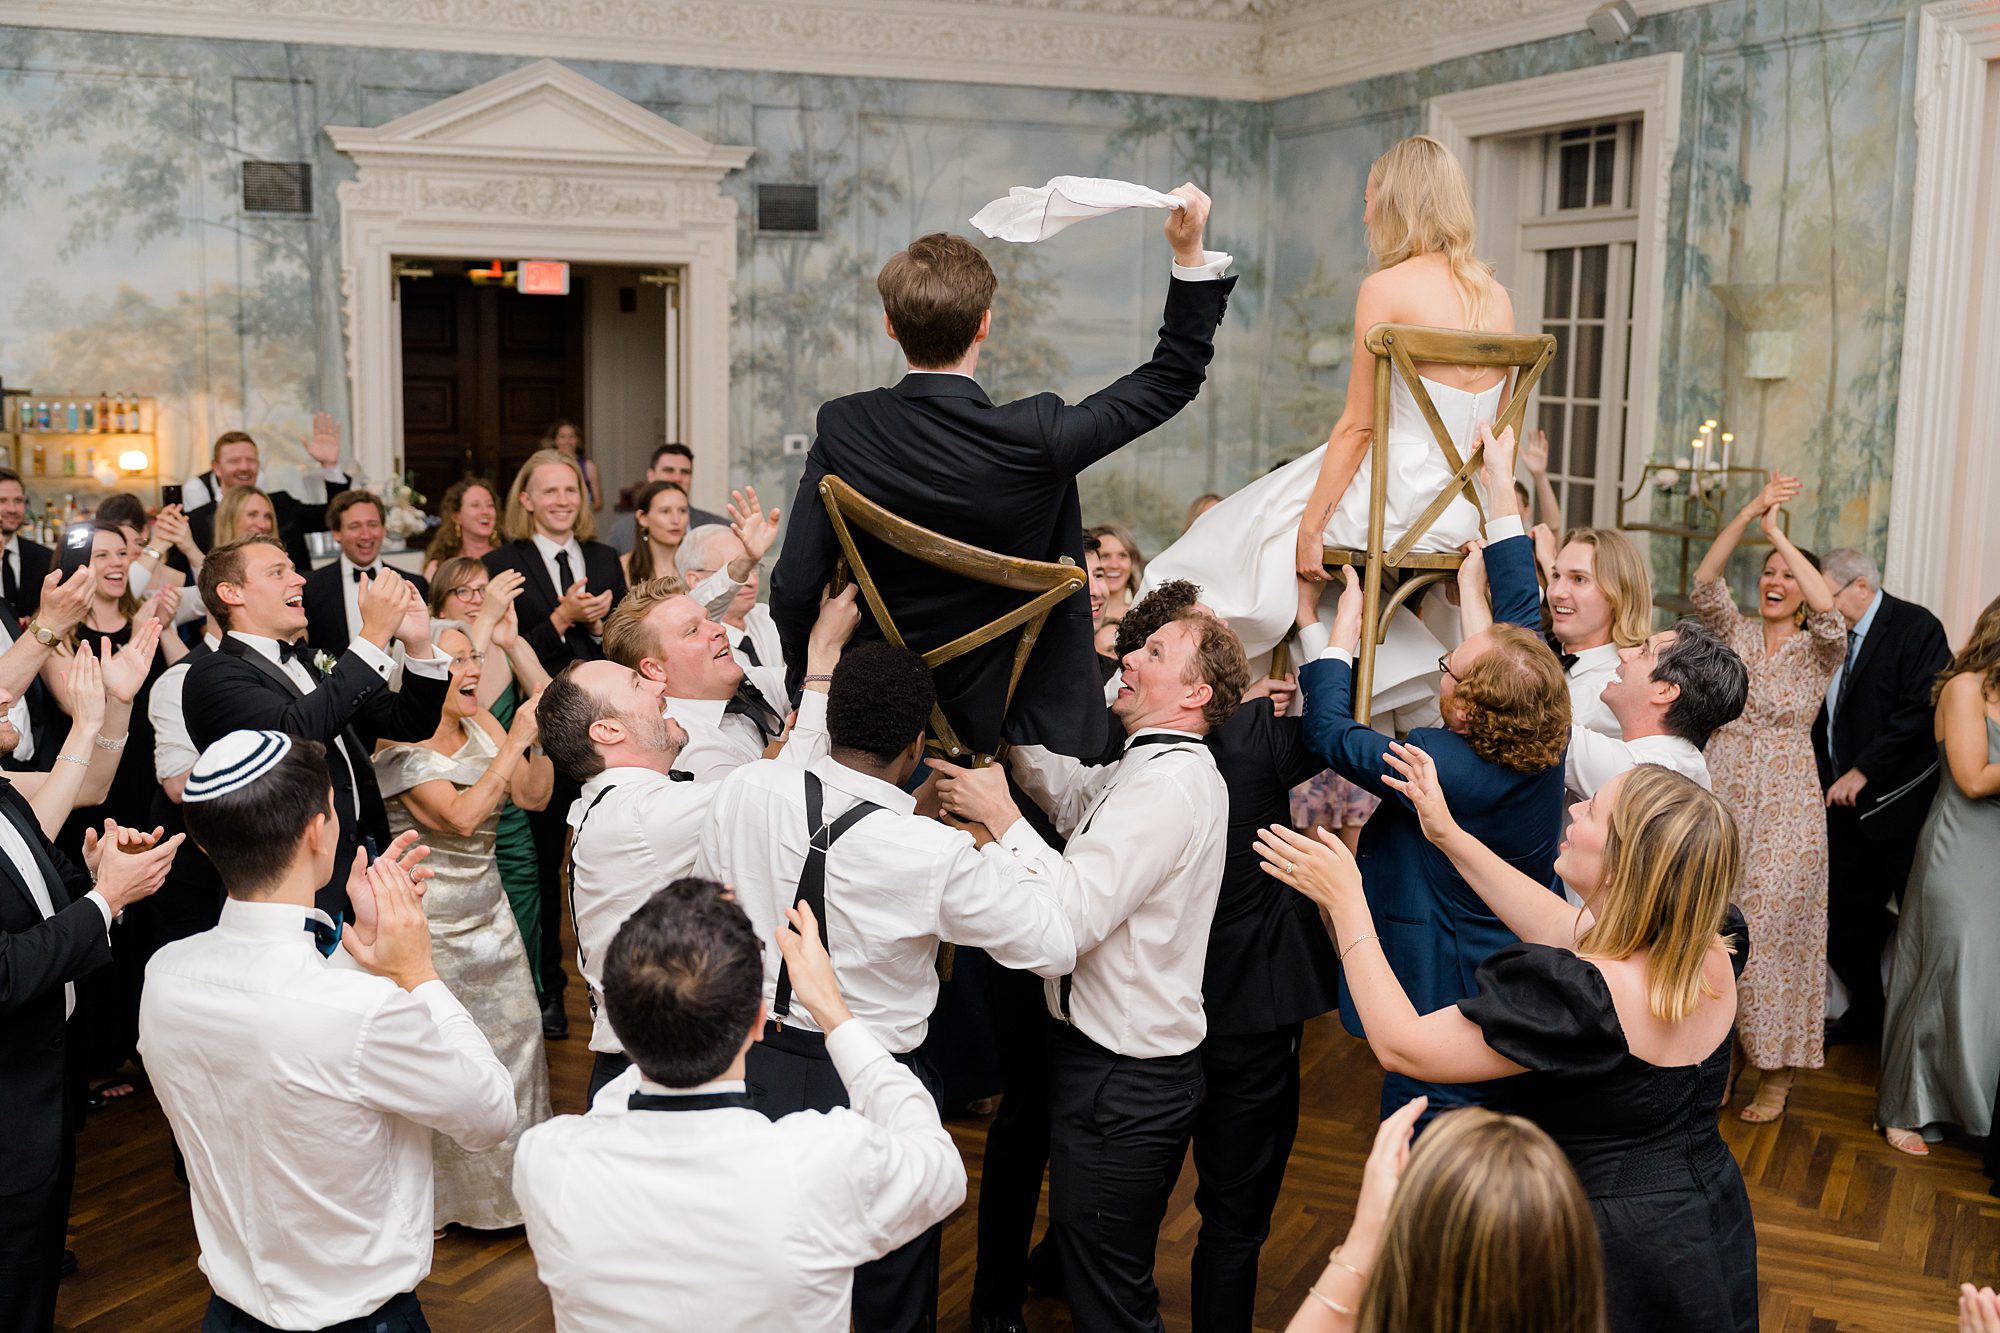 bride and groom are lifted up onto chairs during wedding reception